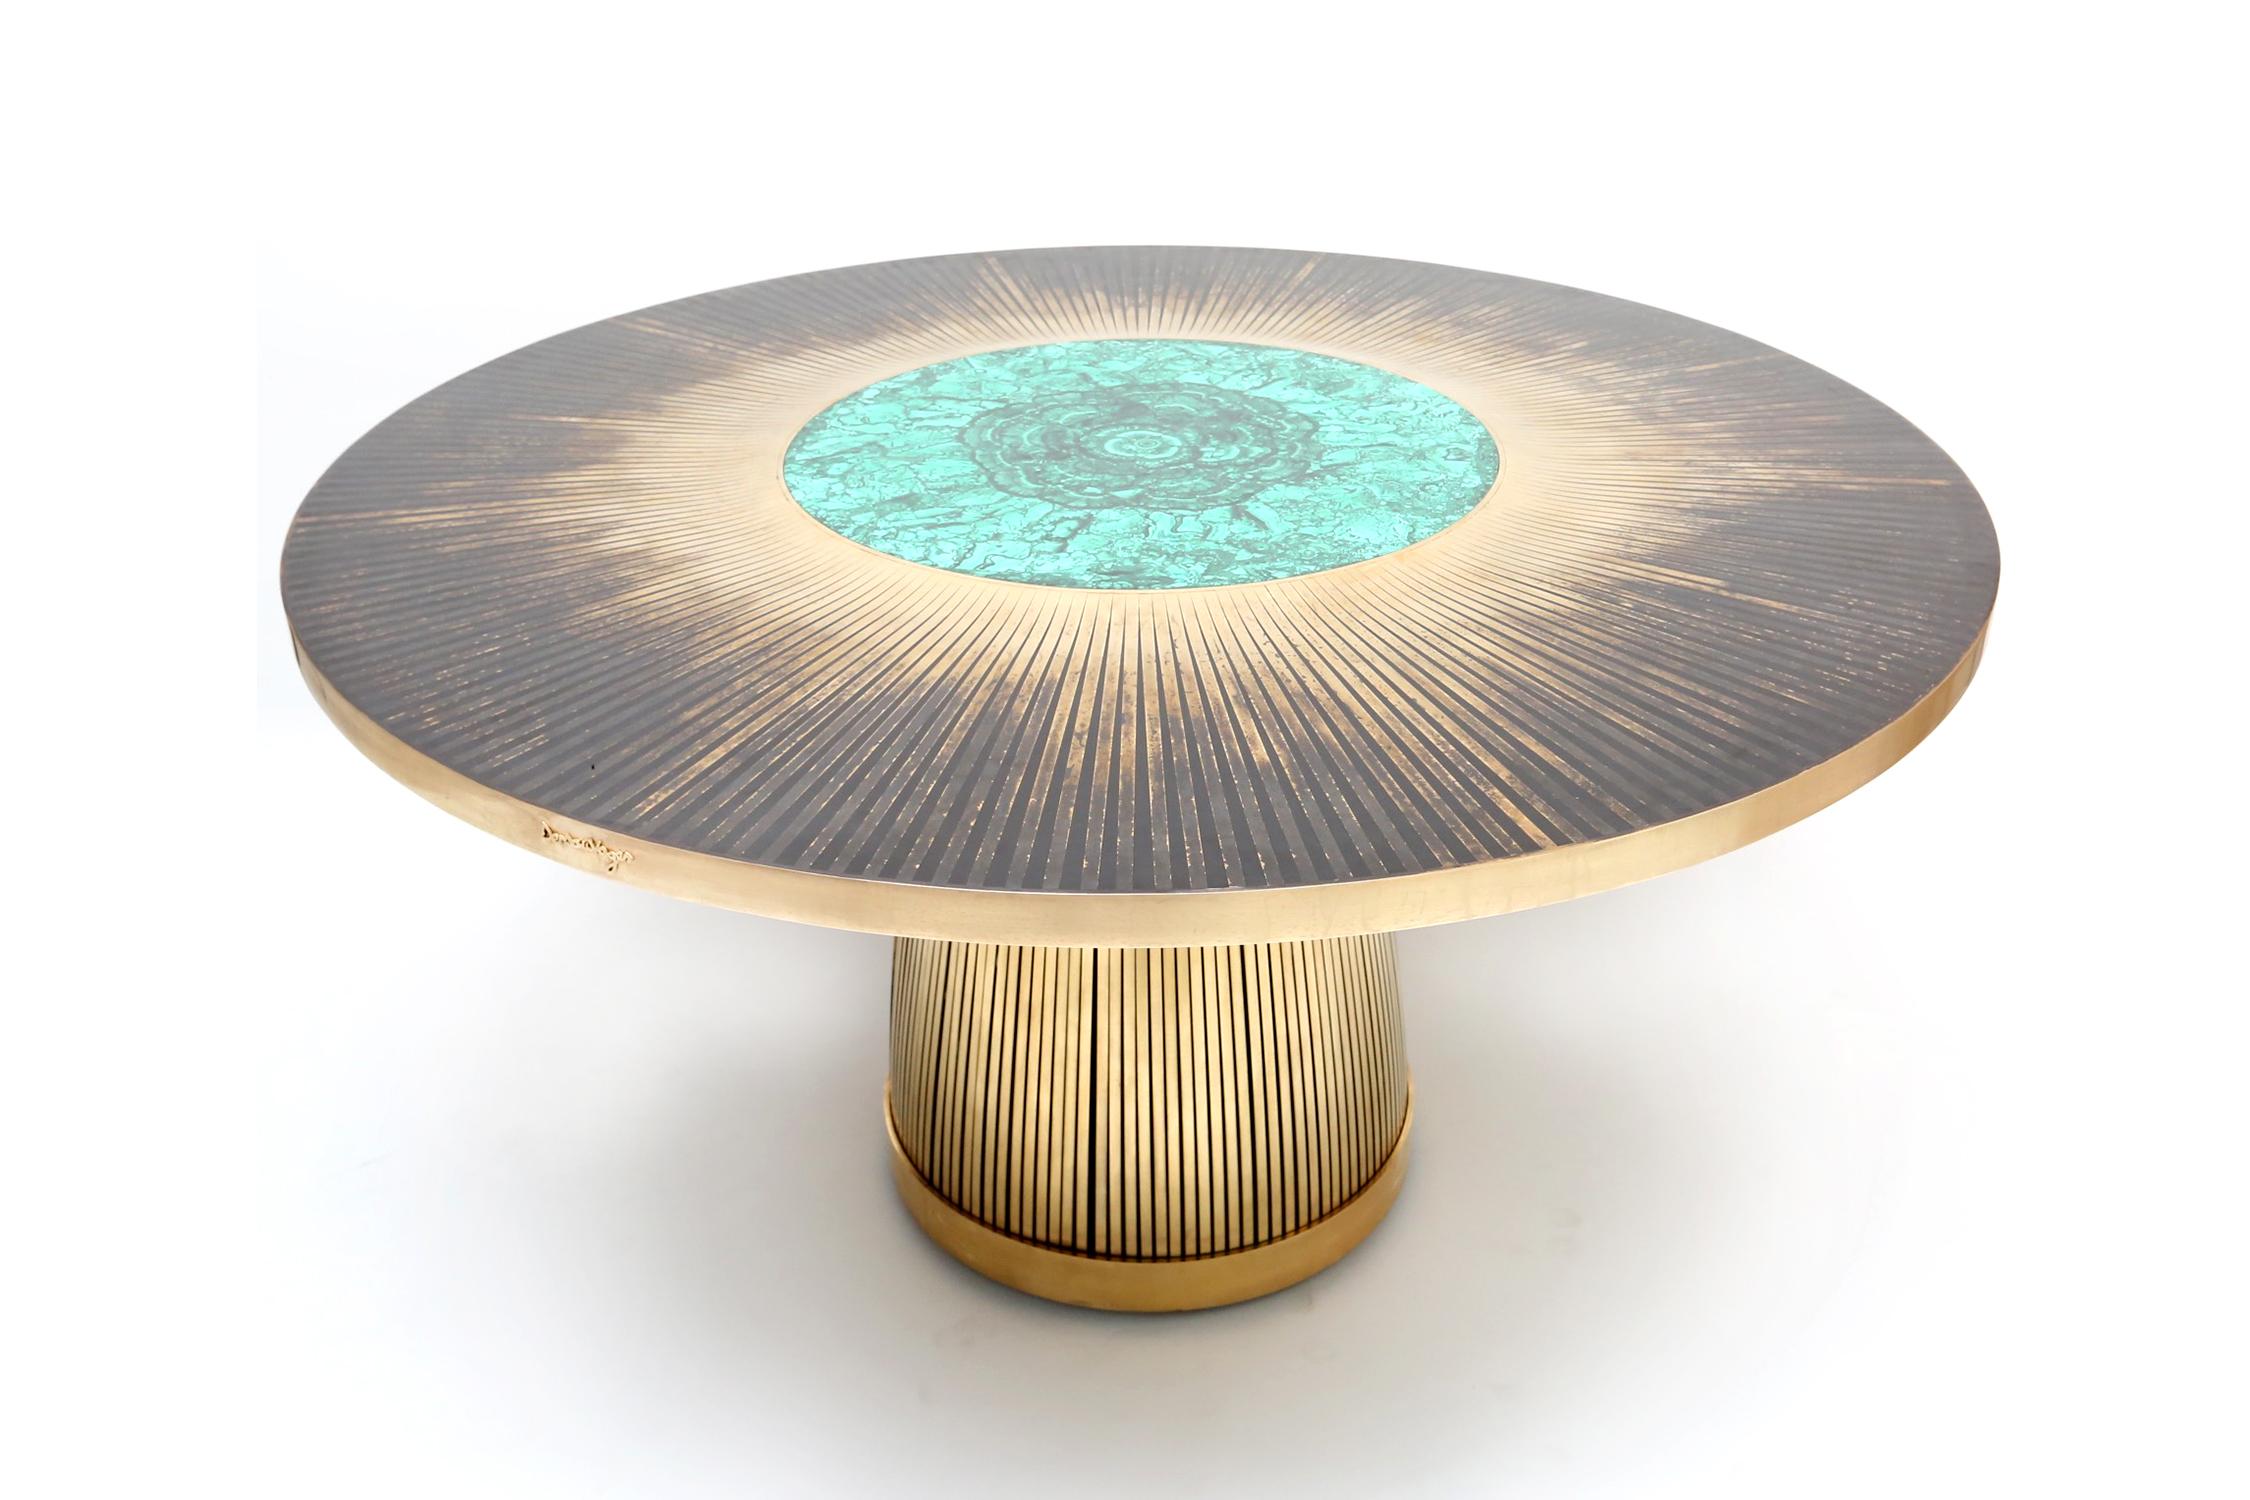 Malachite dining table sculpted by Yann Dessauvages
Signed
Dimensions: D 140 x H 75 cm 
Materials: Brass, resin, malachite

Yann Dessauvages °June 1989 born in Brussels is a Belgian autodidact artist-designer. As the child of a teacher and a